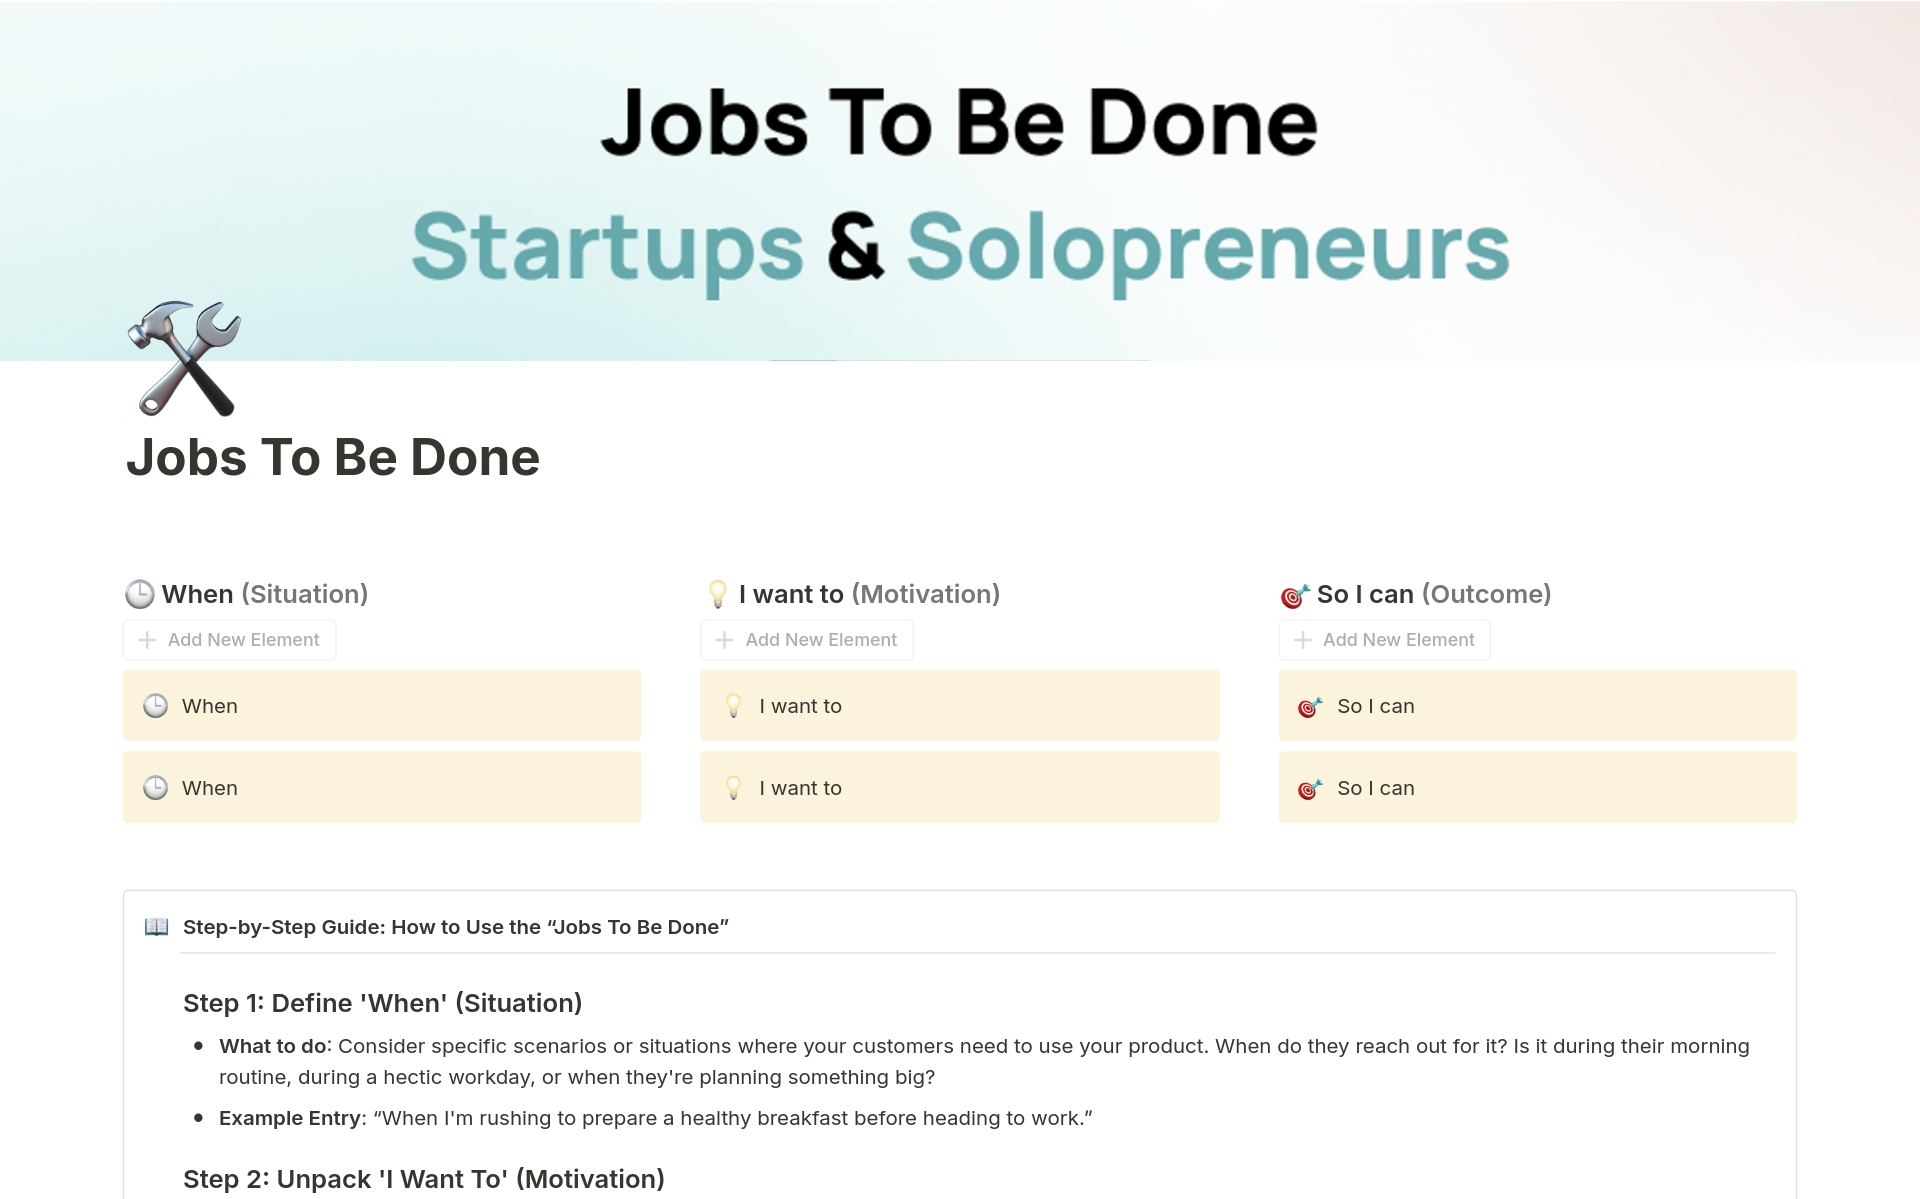 Jobs To Be Done for Startups & Solopreneursのテンプレートのプレビュー